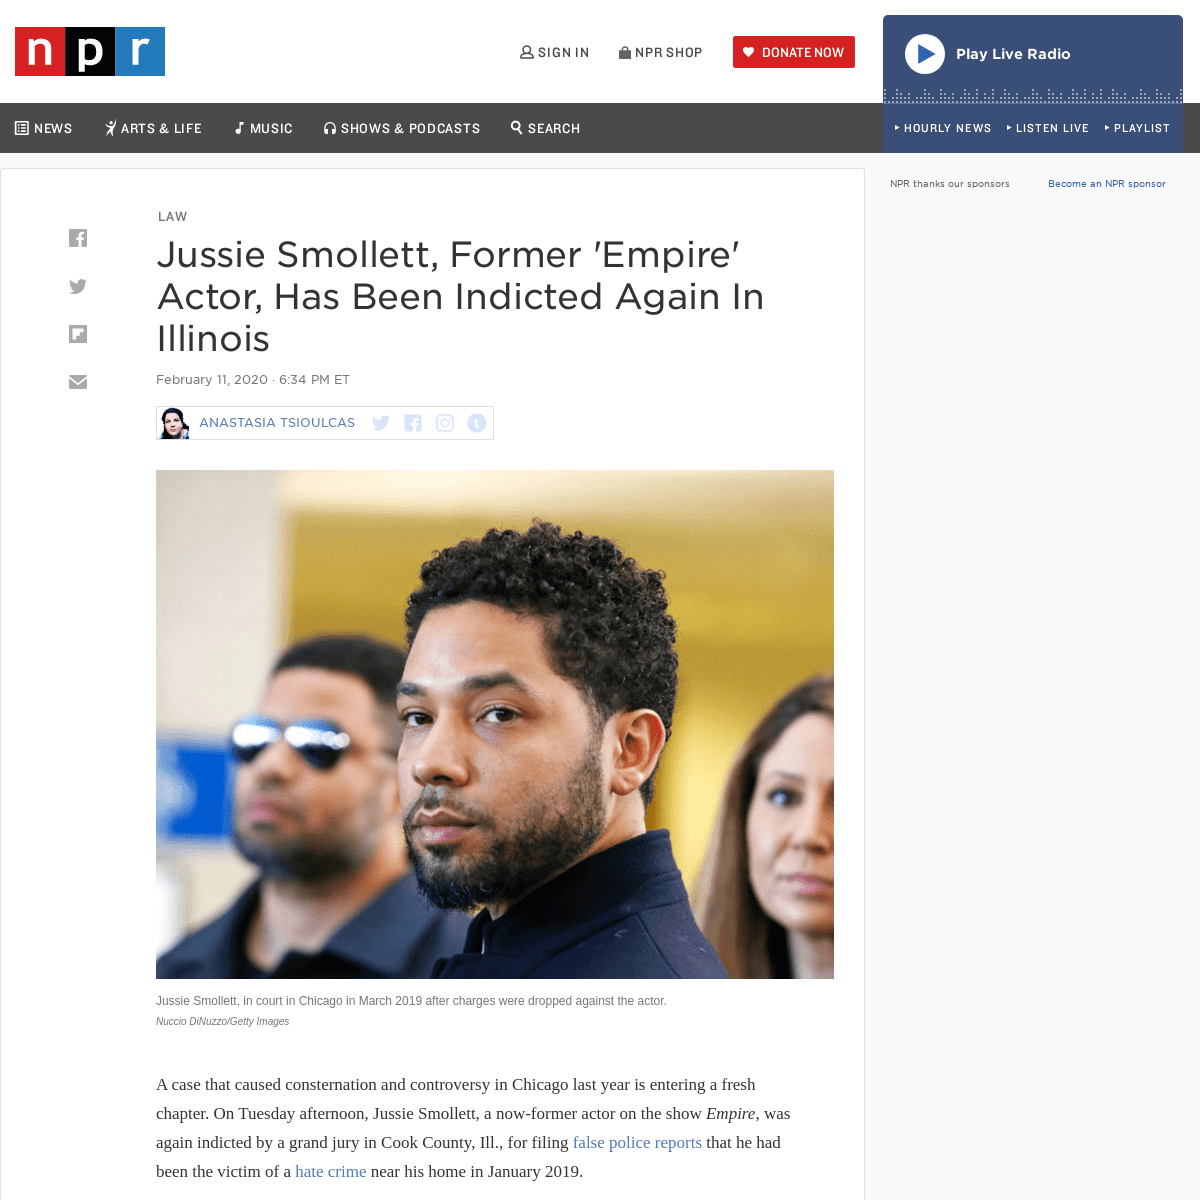 A complete backup of www.npr.org/2020/02/11/804992026/jussie-smollett-former-empire-actor-has-again-been-indicted-in-illinois